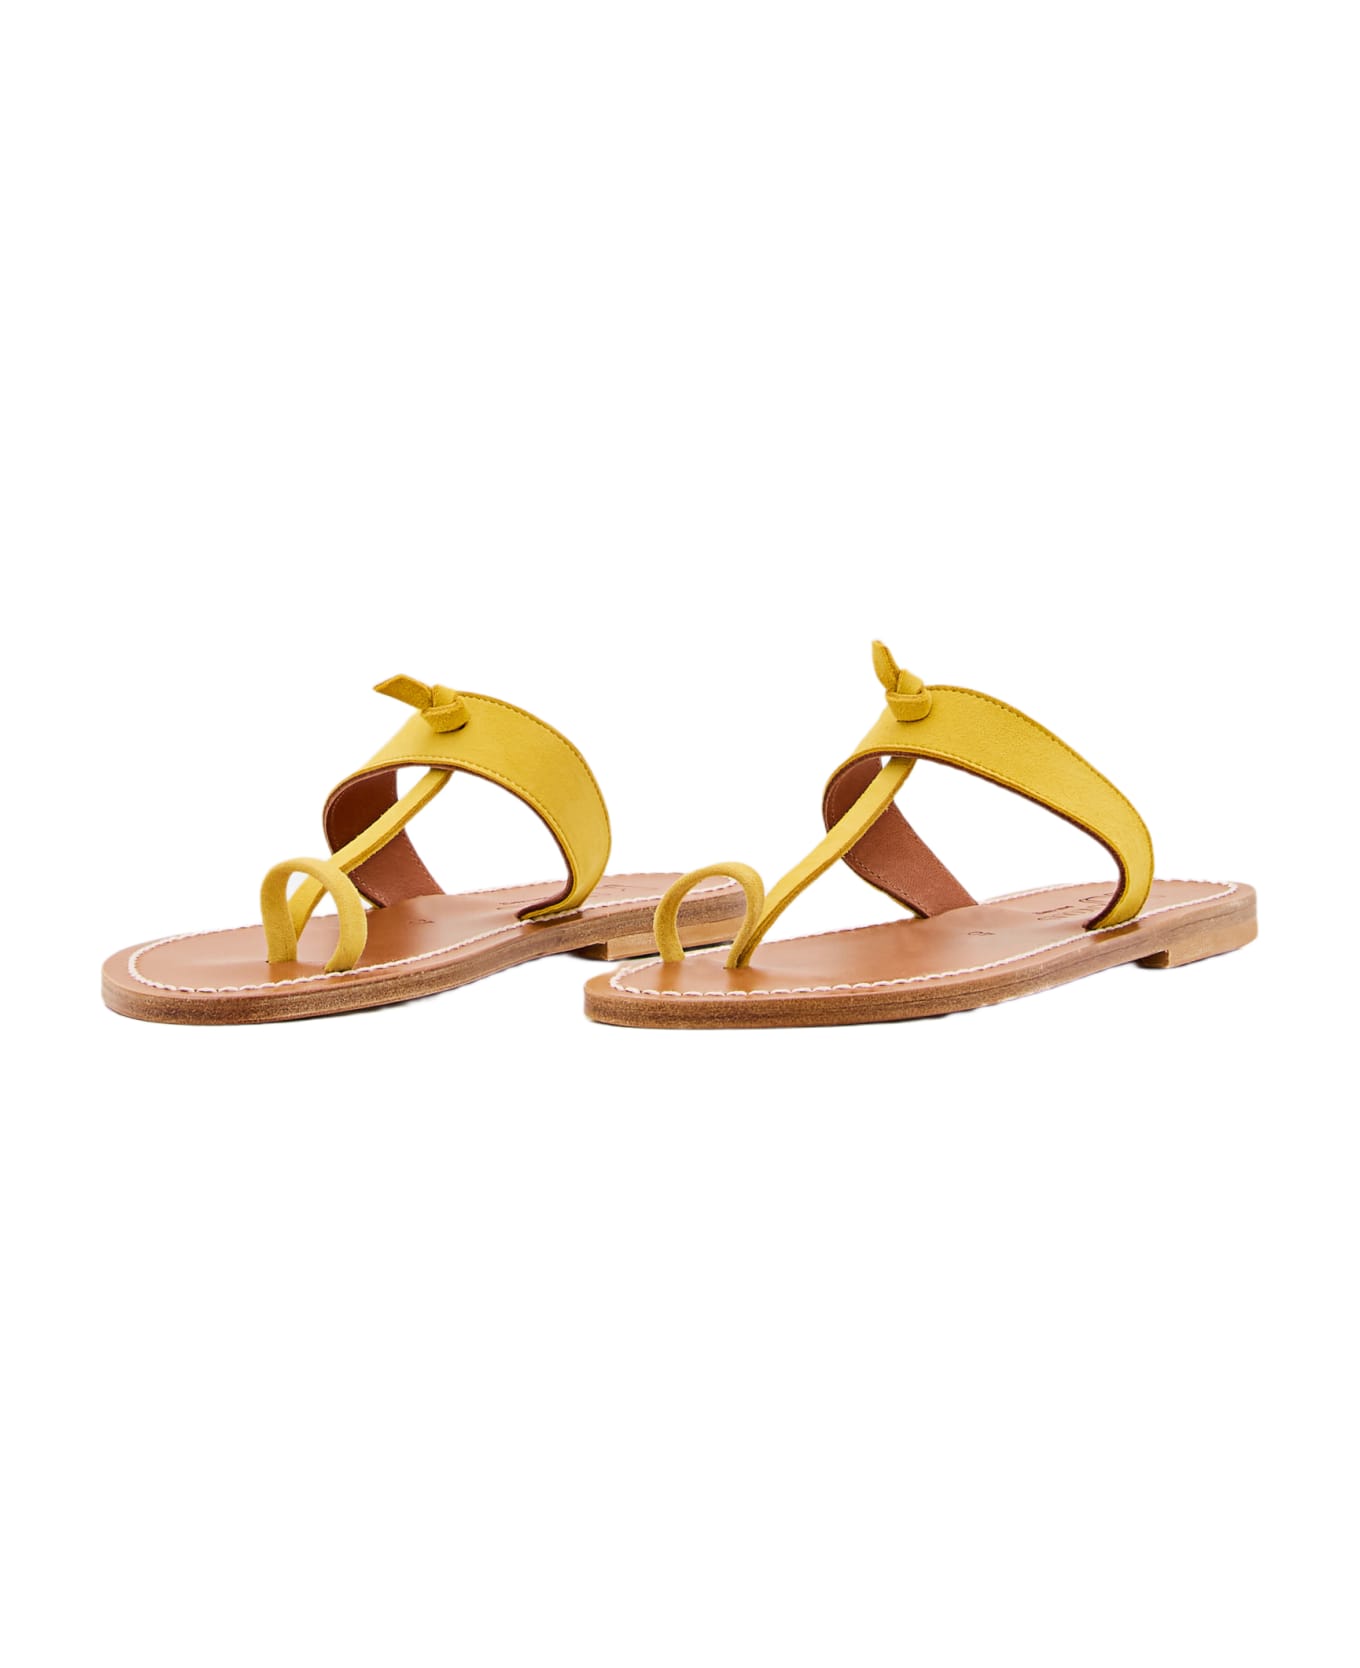 K.Jacques Ganges Leather Sandals - Yellow サンダル